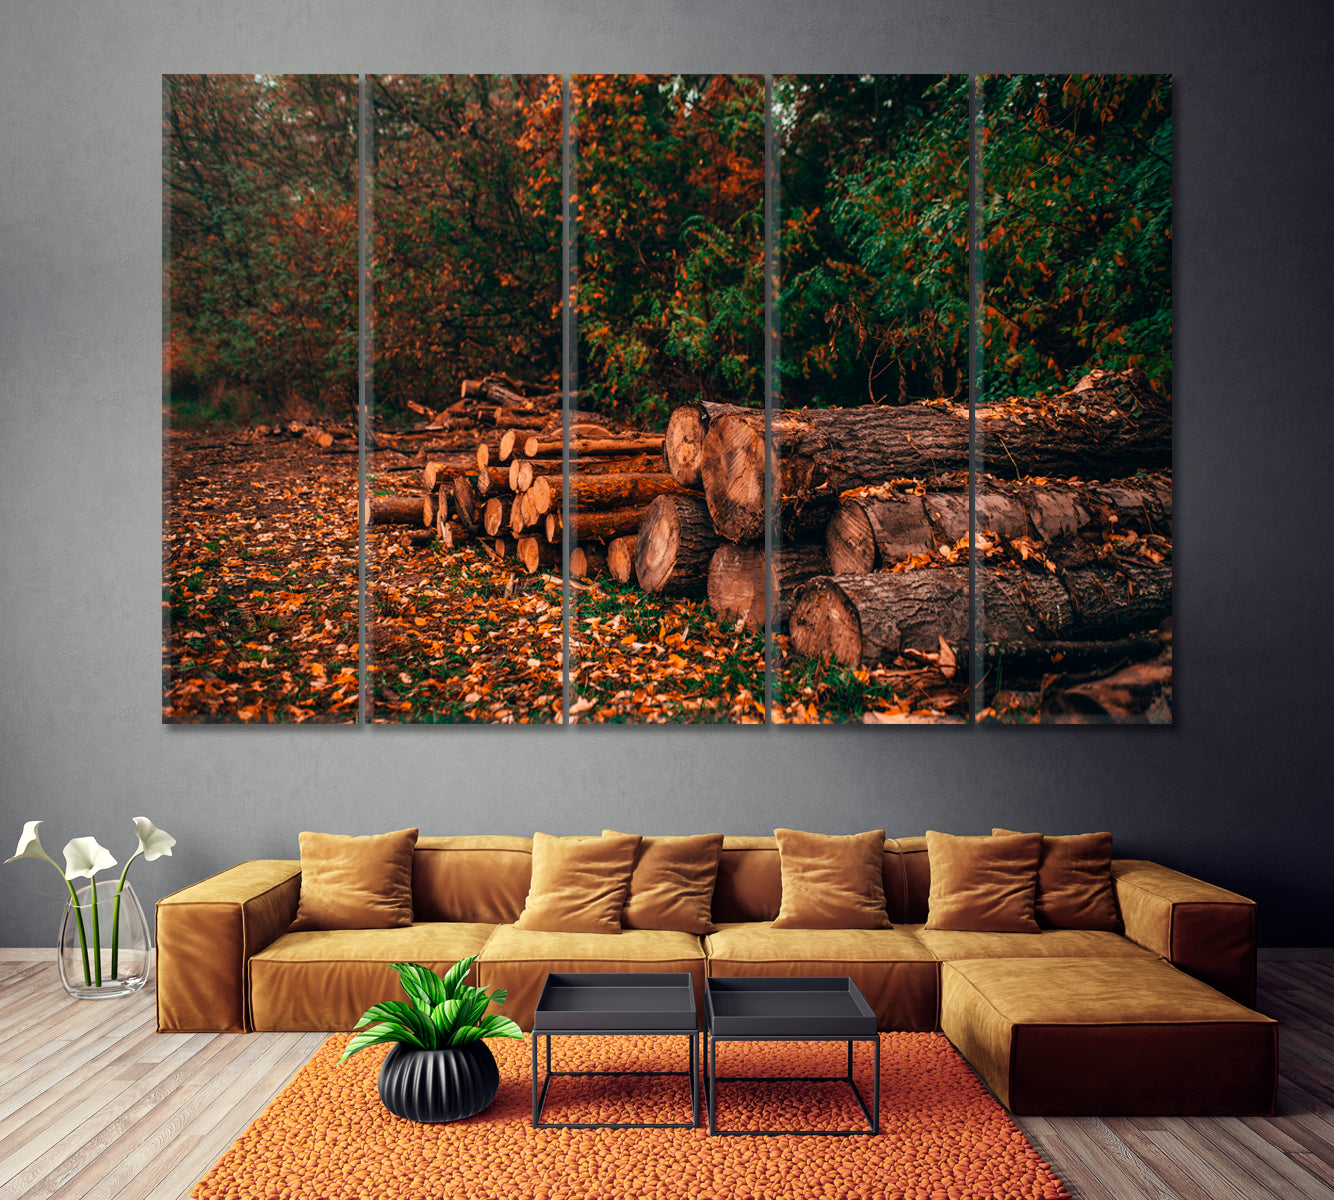 Pine Logs in Forest Canvas Print ArtLexy 5 Panels 36"x24" inches 